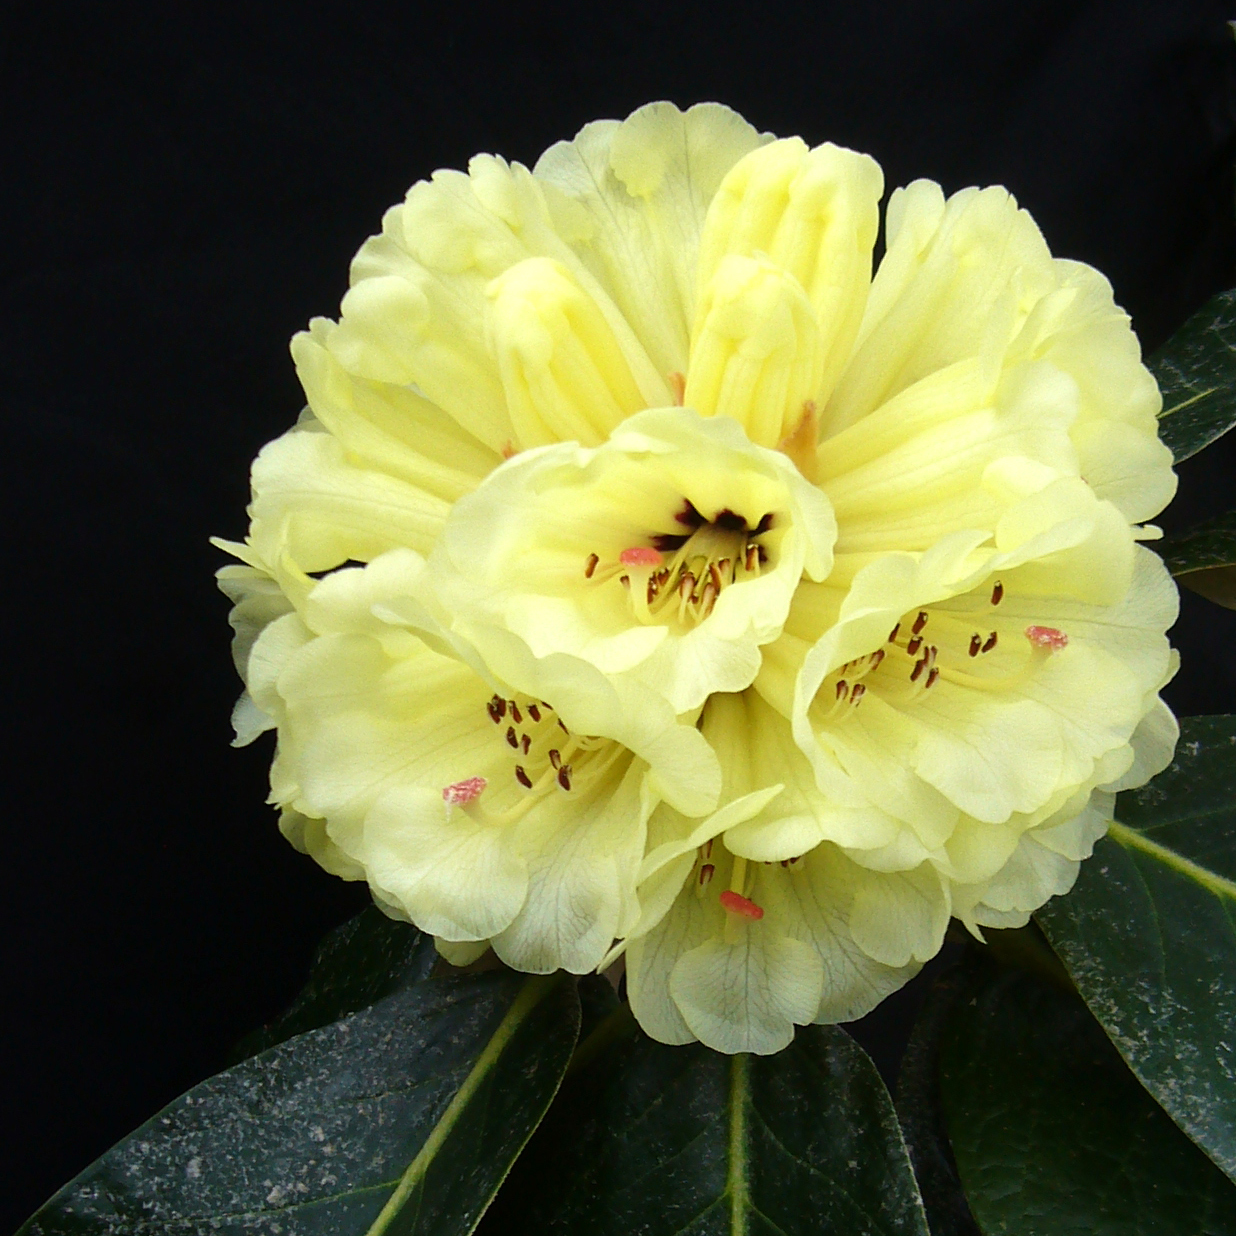 MACABEANUM NAPE O52 high alt, compact Rhododendron Larger Species Rhododendrons